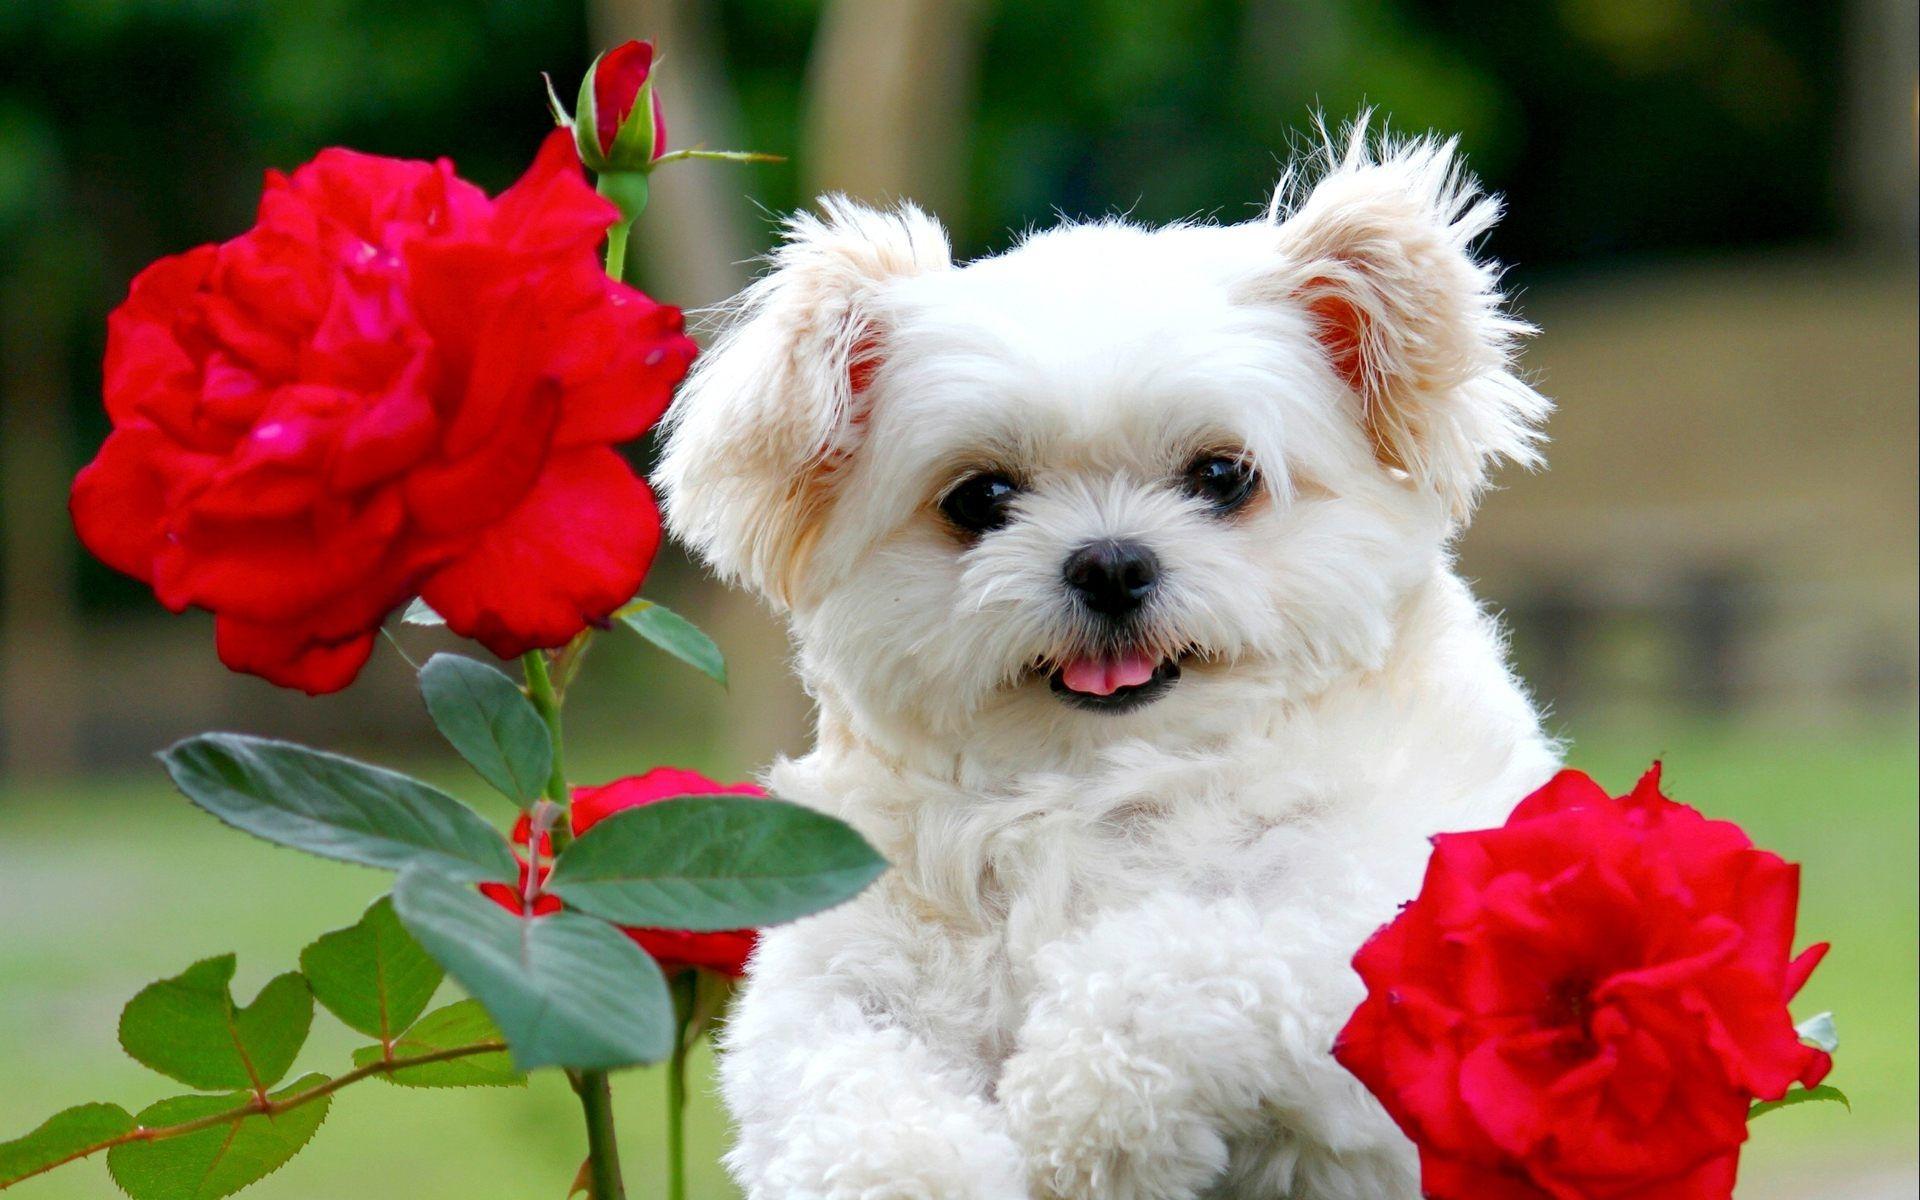 Cute white puppy with red rose flowers. HD Wallpaper Rocks. Cute fluffy puppies, Cute puppy wallpaper, Cute white puppies